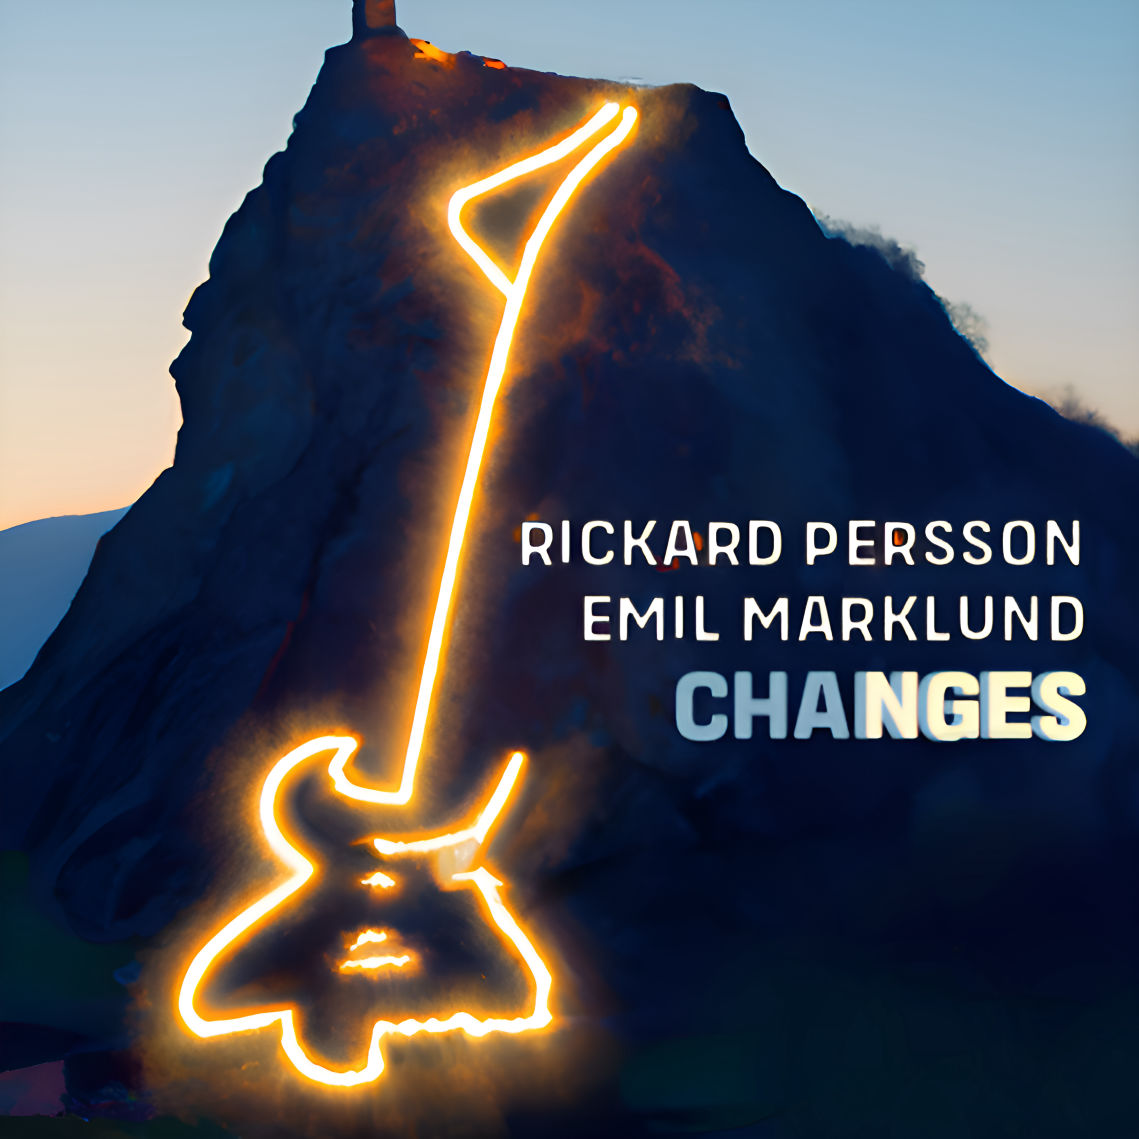 Changes - Music album by Rickard Persson